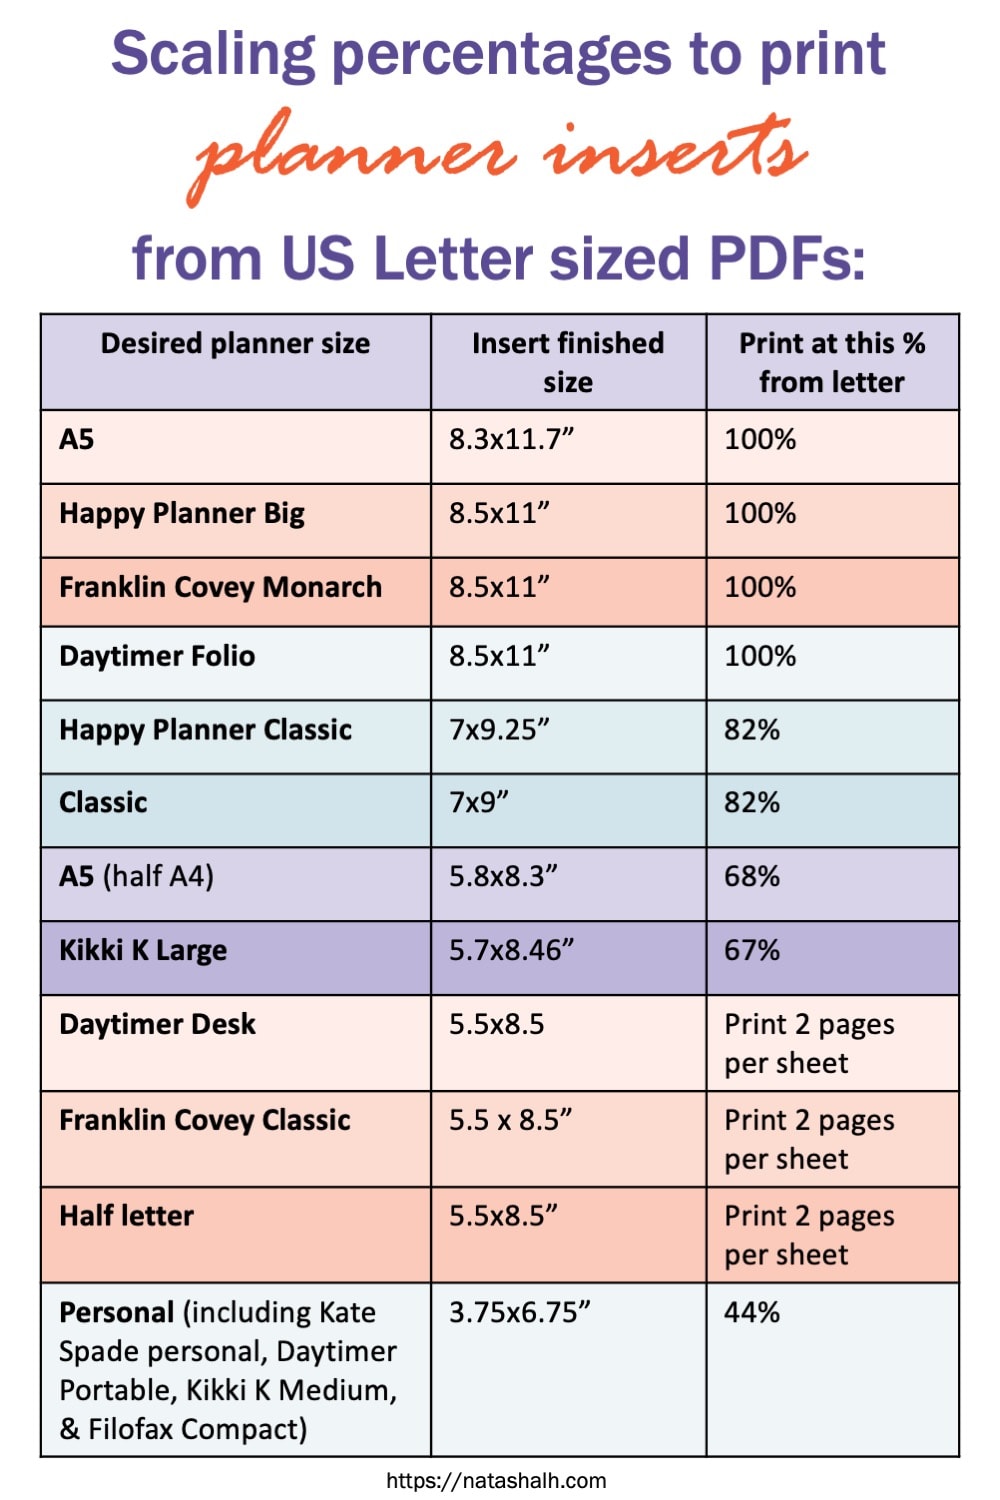 Scaling percentages to print US letter sized PDFs for planner inserts